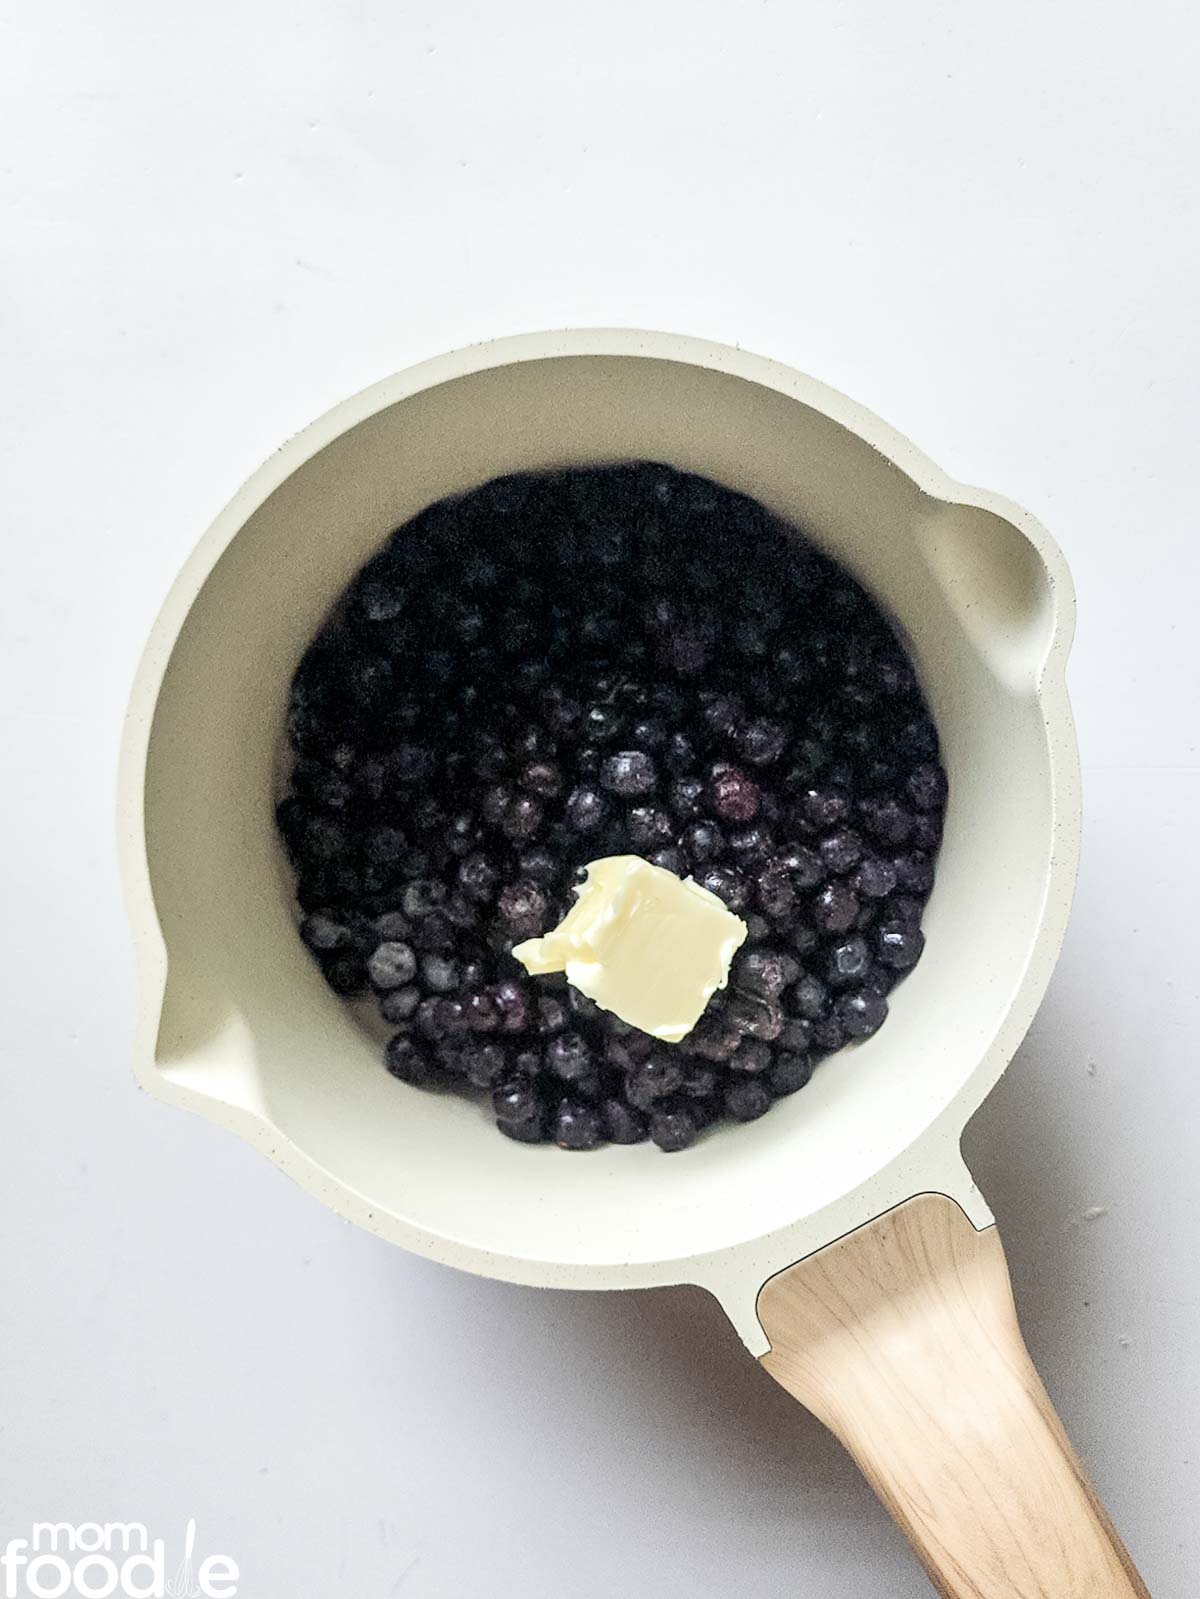 place frozen or fresh blueberries and butter in pan